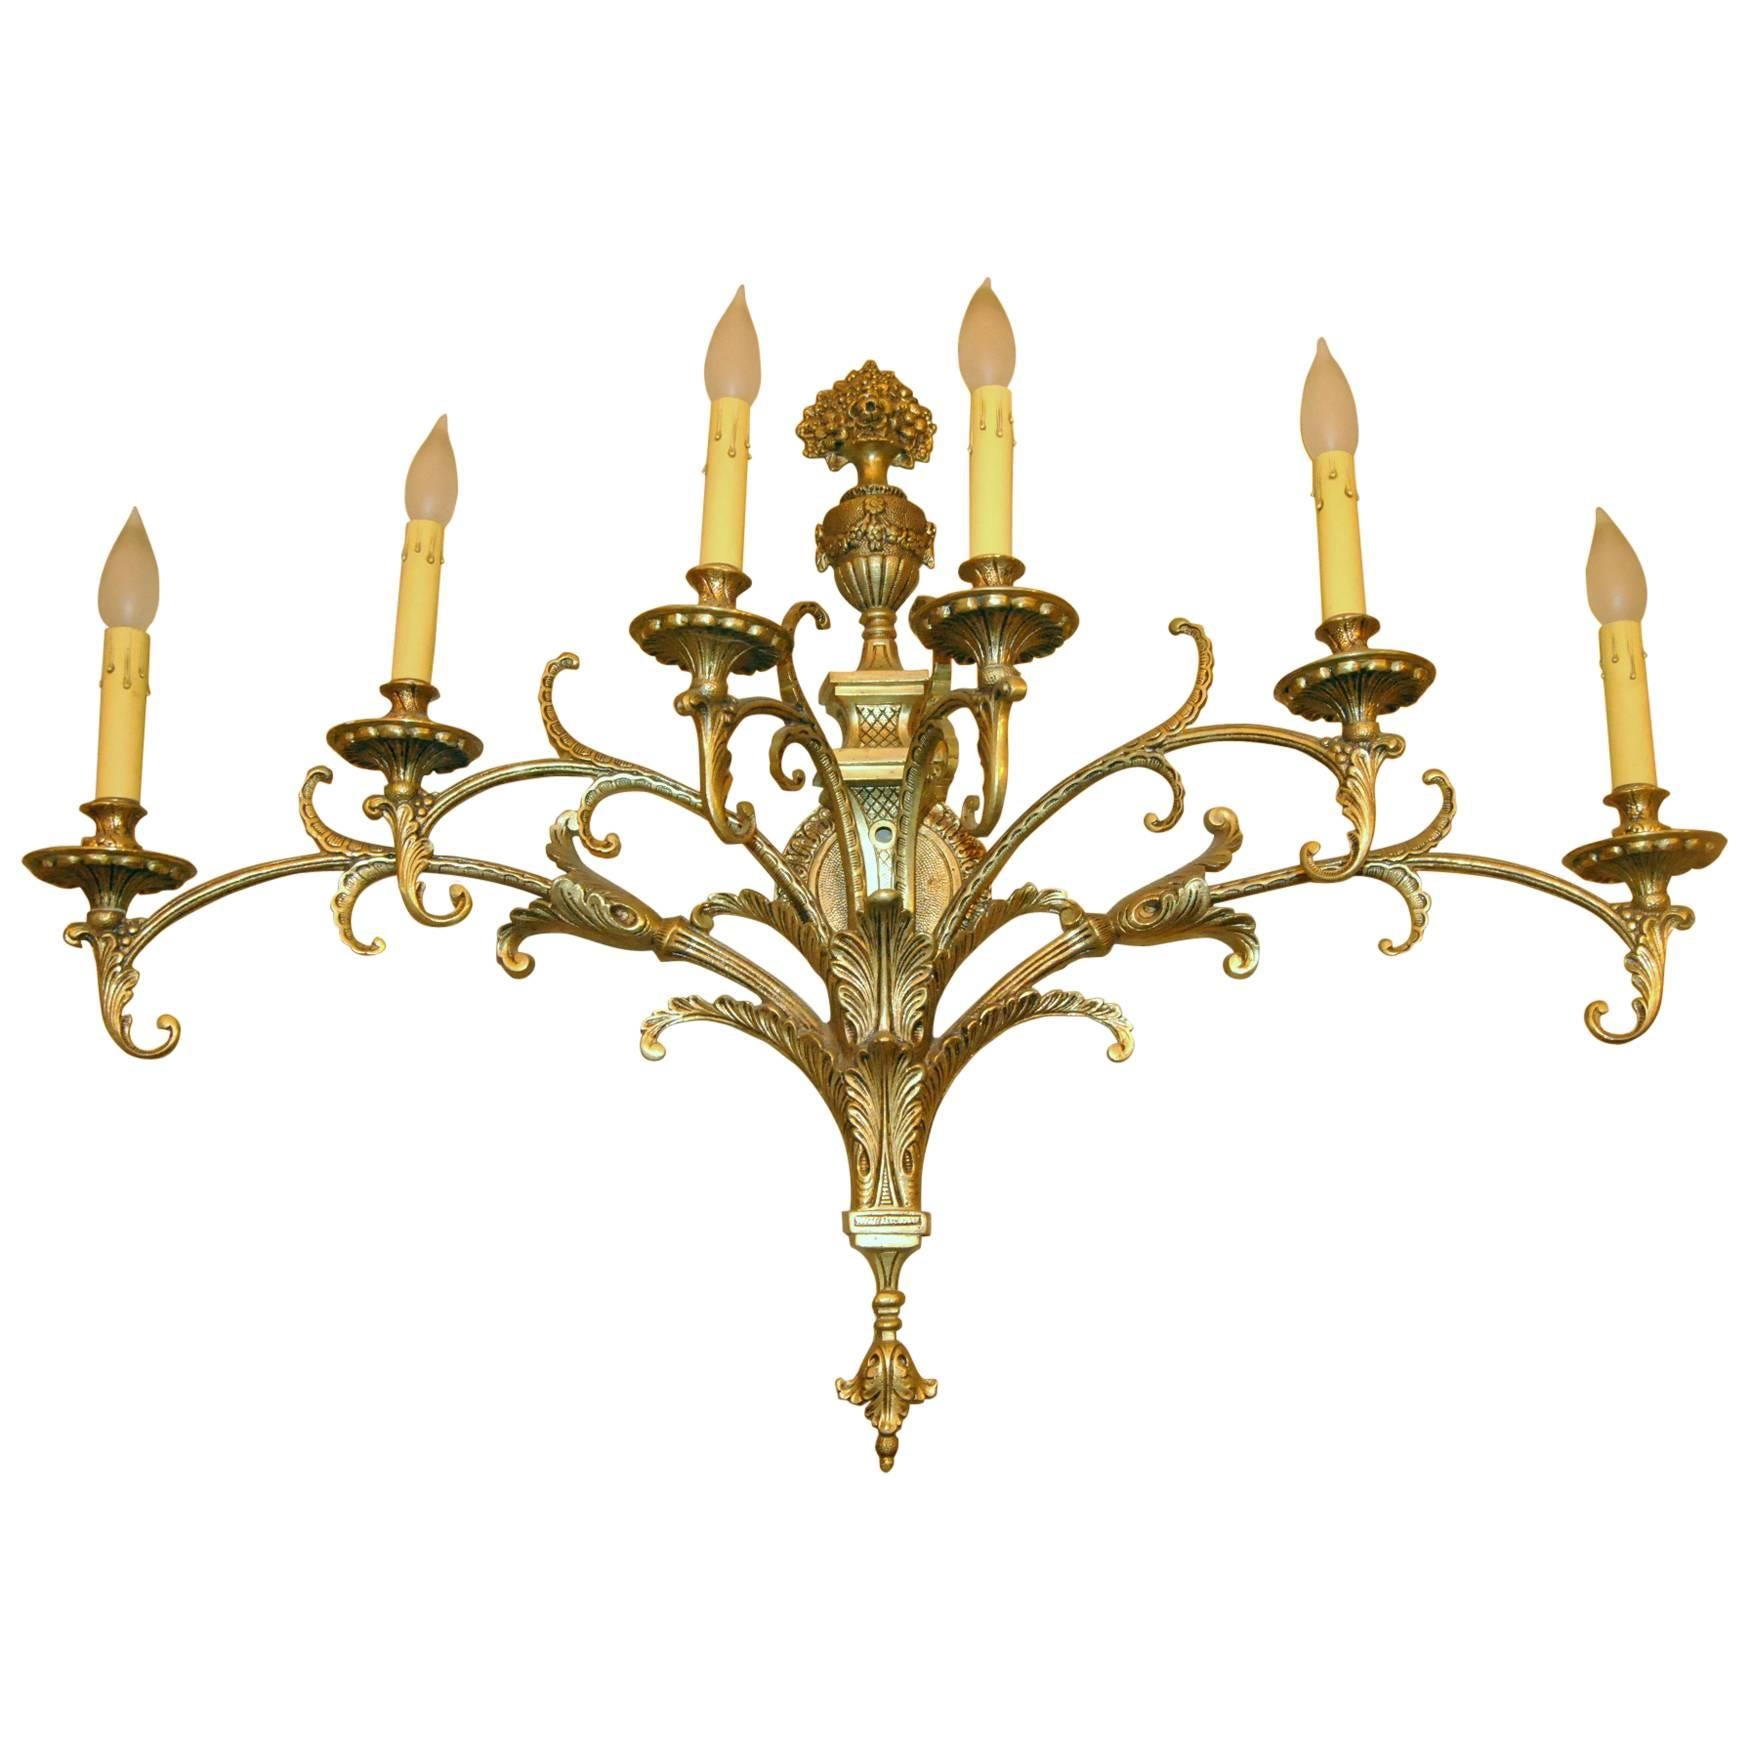 French Style Large Six-Arm Wall Sconce or Light Fixture with Urn and Flowers